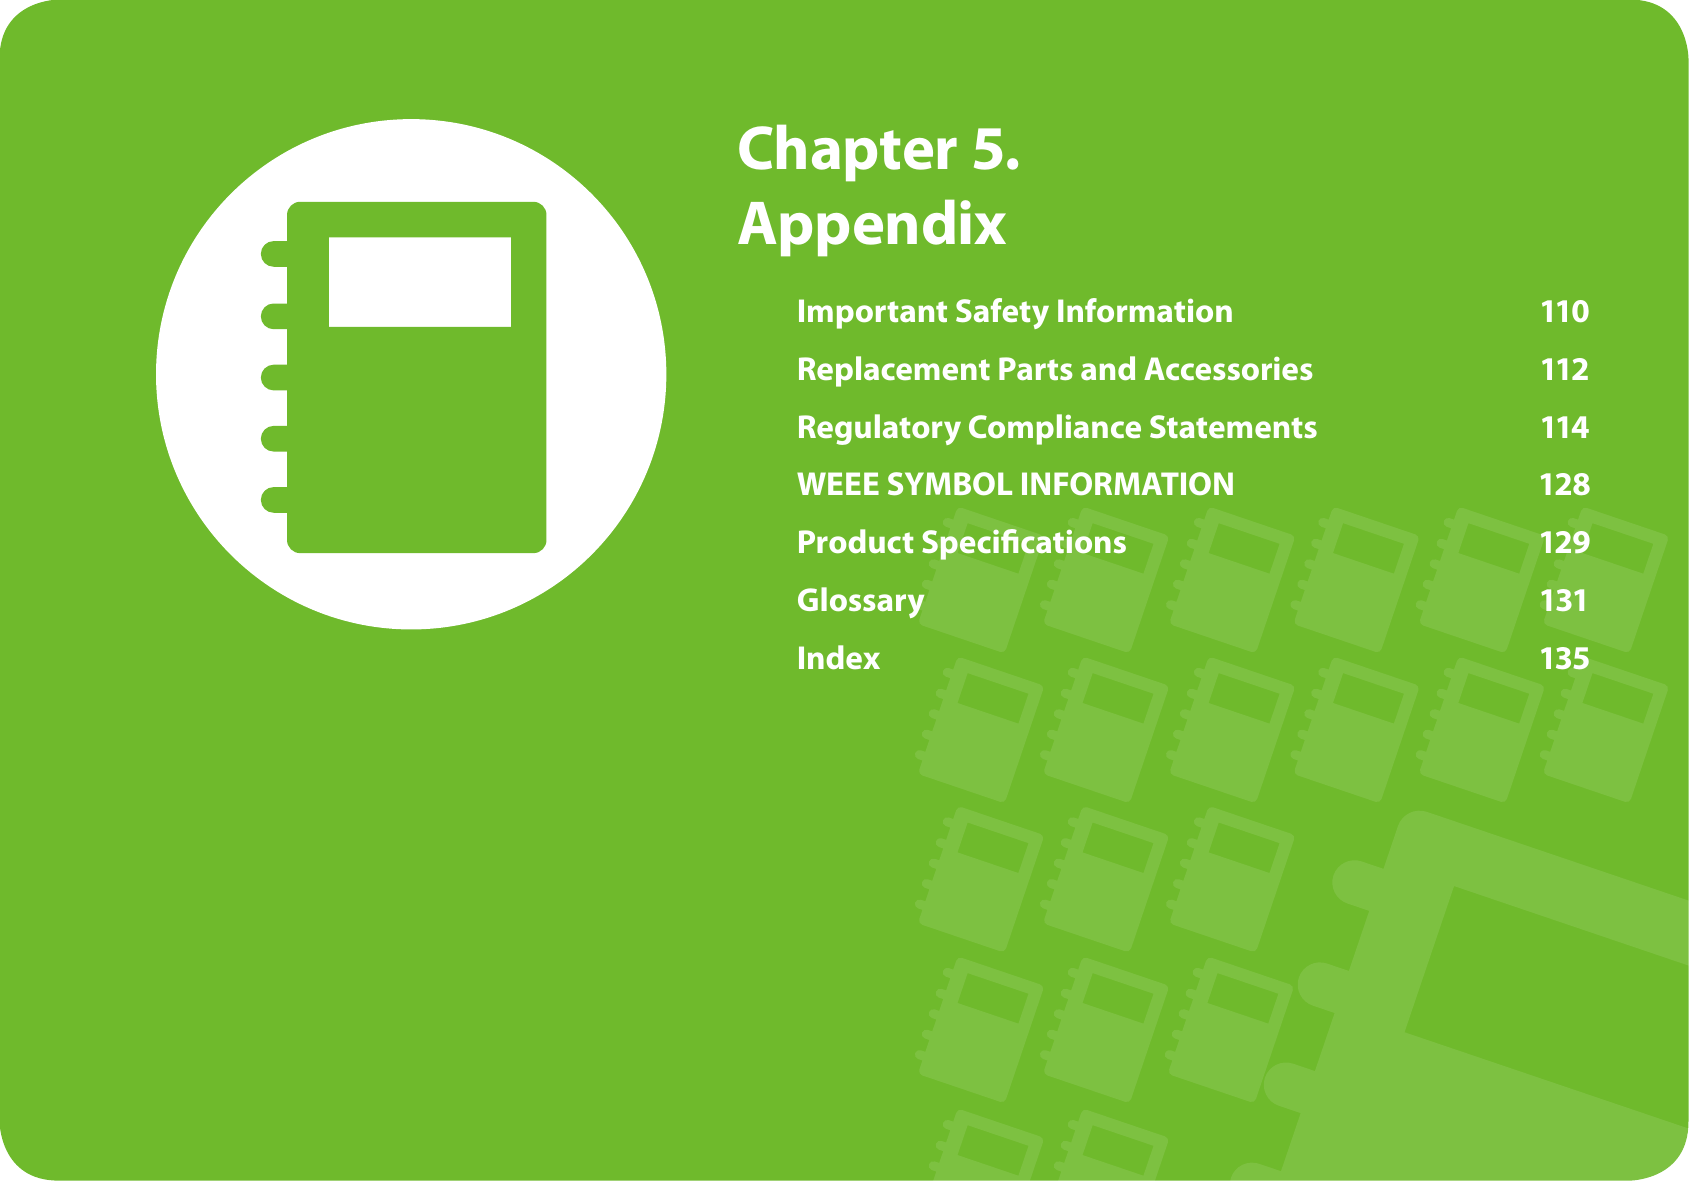 Chapter 5.  AppendixImportant Safety Information  110Replacement Parts and Accessories  112Regulatory Compliance Statements  114WEEE SYMBOL INFORMATION  128Product Specications  129Glossary  131Index  135